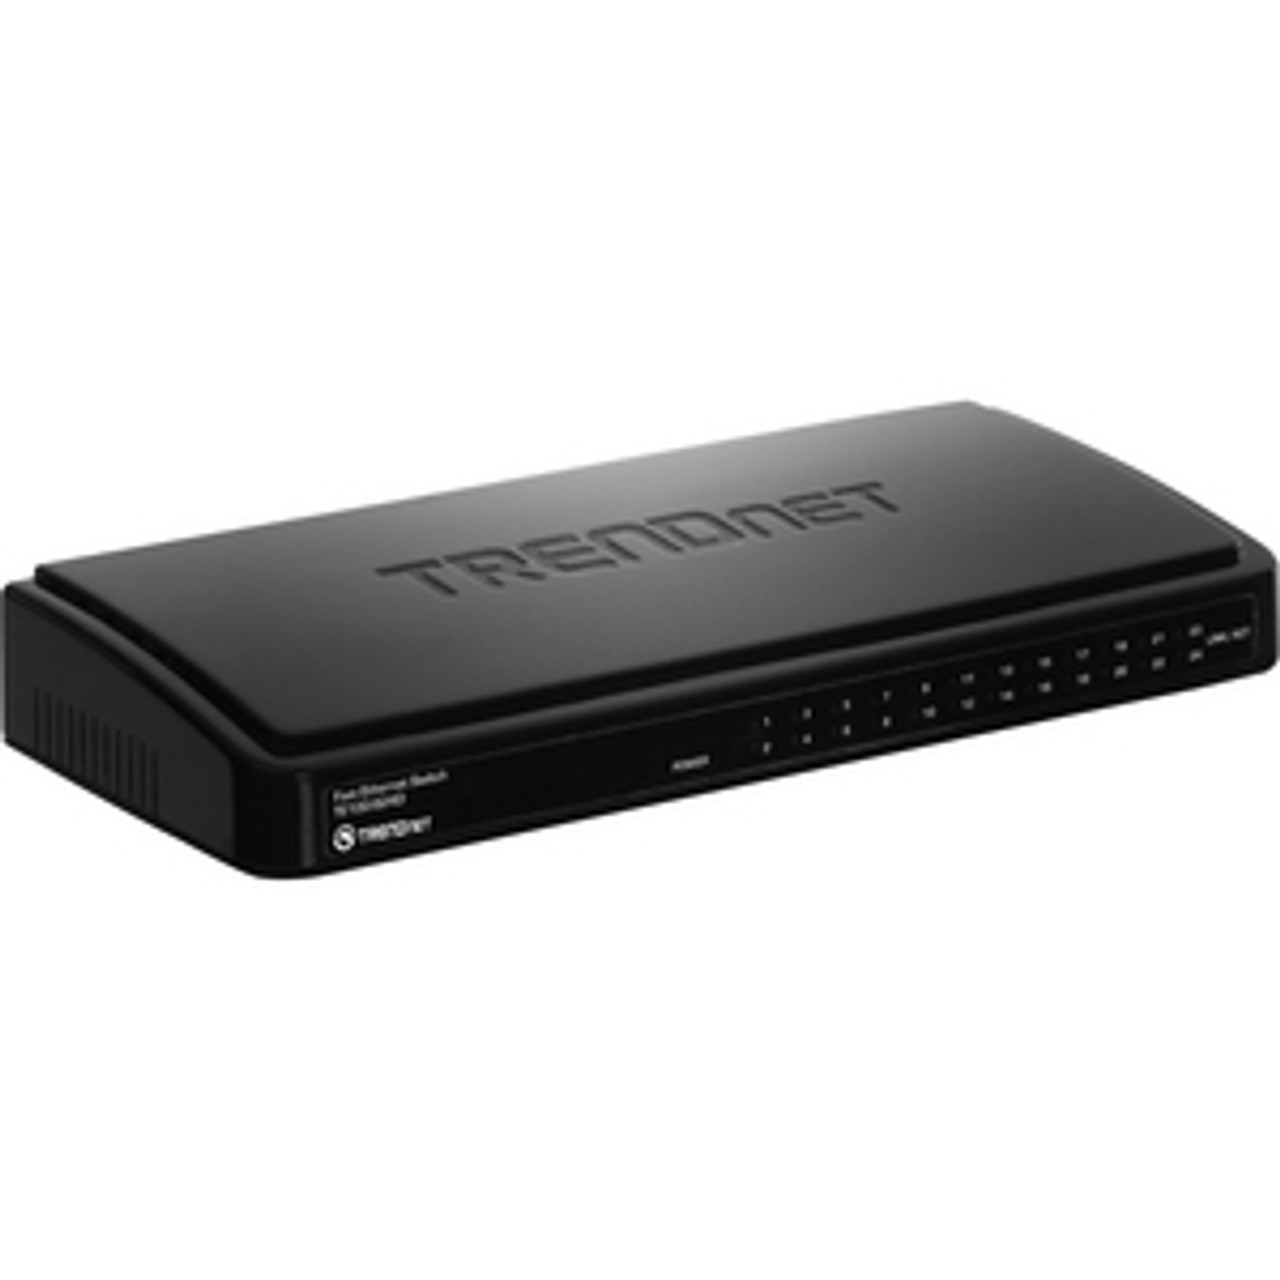 TE100-S24D (V1.0R) TRENDnet 24-Port 10/100 Mbps Switch - 24 Ports - Fast Ethernet - 10/100Base-TX - 2 Layer Supported - AC Adapter - Twisted Pair - Desktop - 3 Year